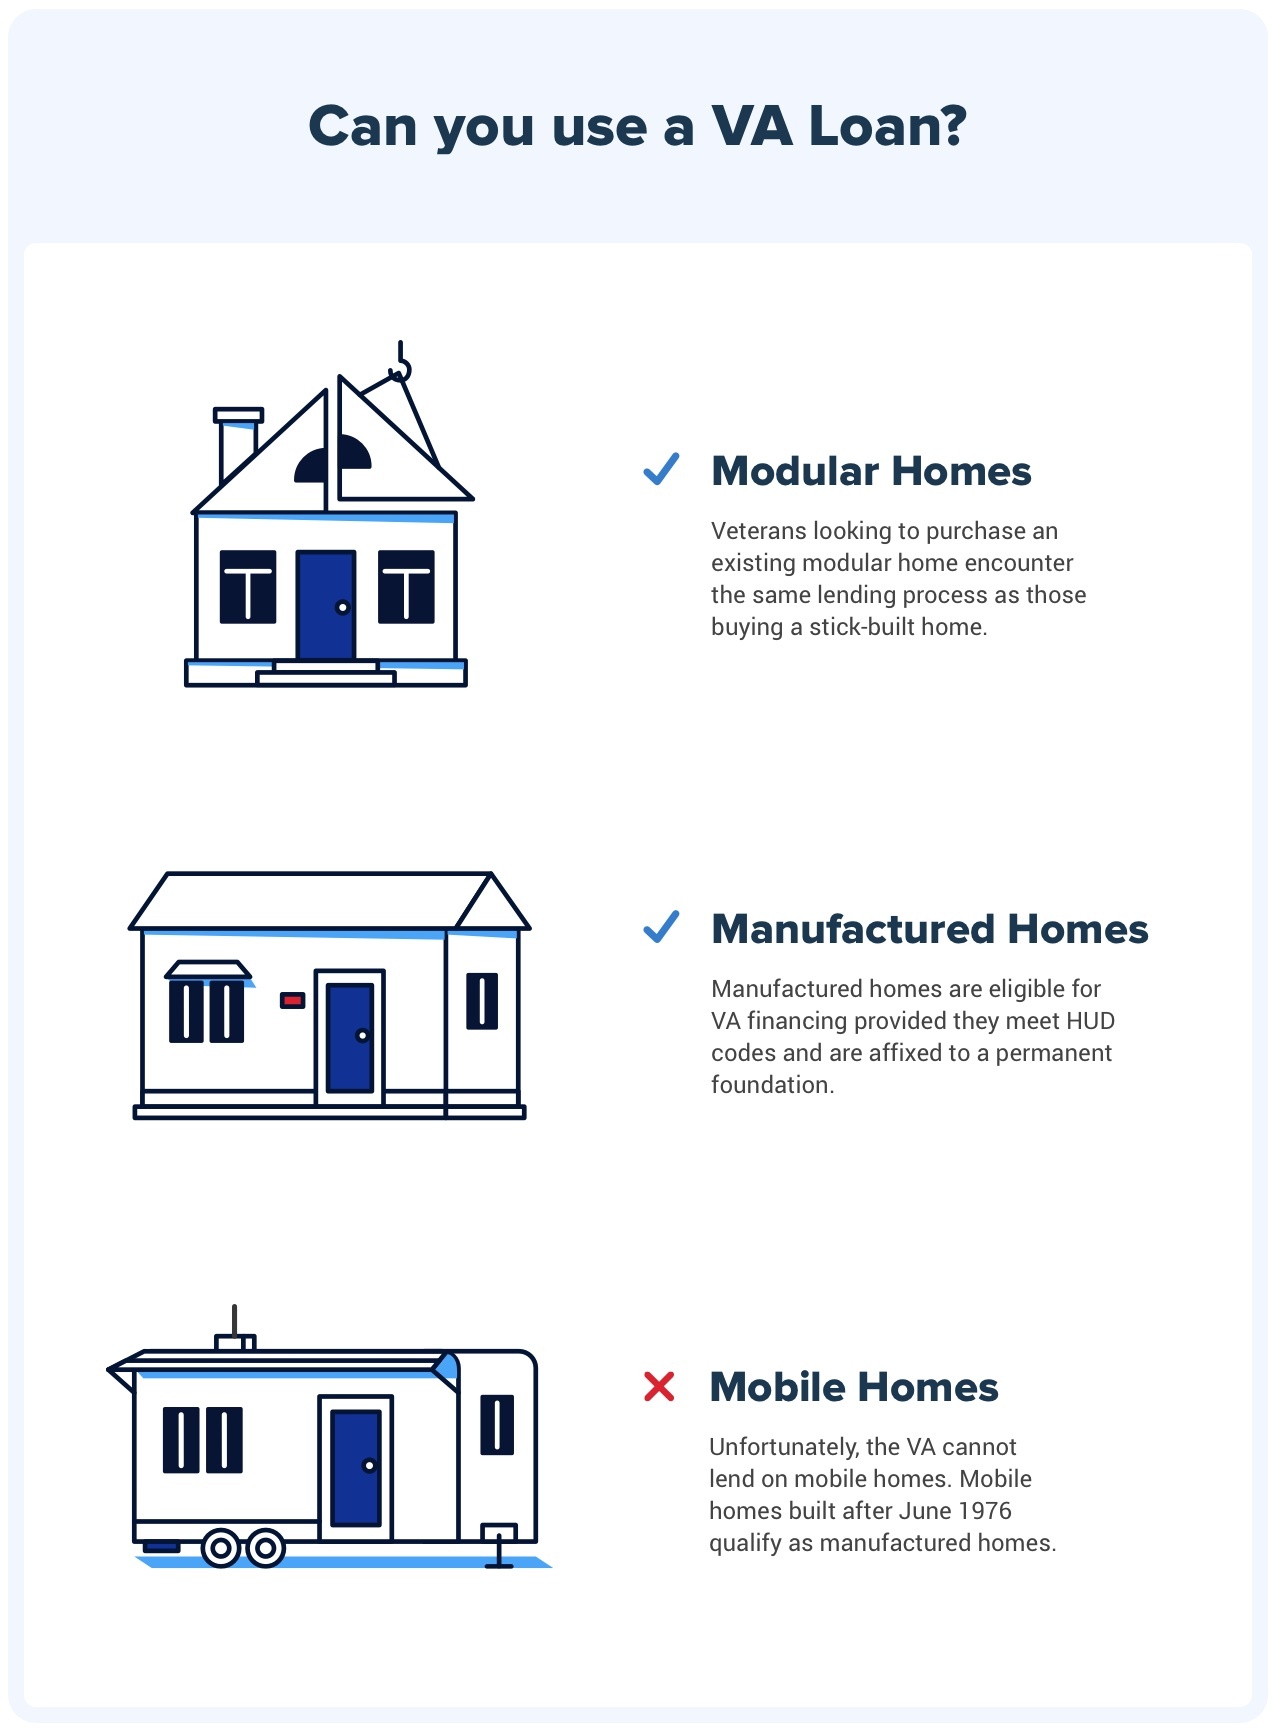 Can you use a VA Loan? This infographic compares three different home types: modular homes, manufactured homes, and mobile homes. Small, illustrated icons represent each home type. Modular and Manufactured home icons have blue checks next to them to denote that they are eligible for VA financing, while the mobile home has a red 'X' to denote that it is not.